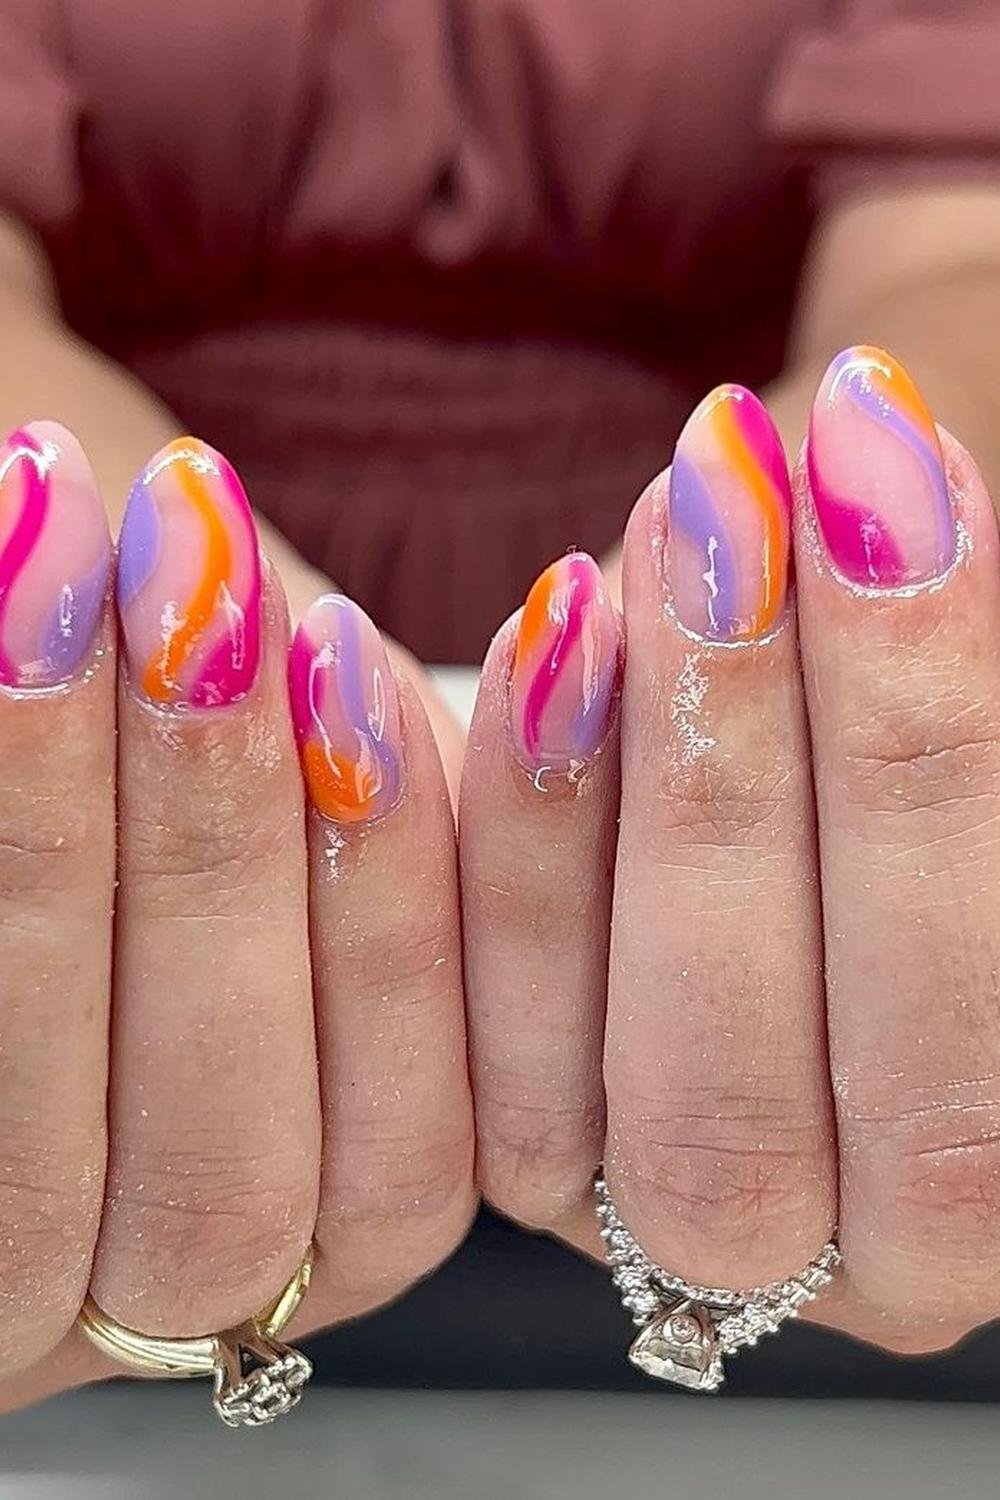 11 - Picture of Pink and Orange Nails